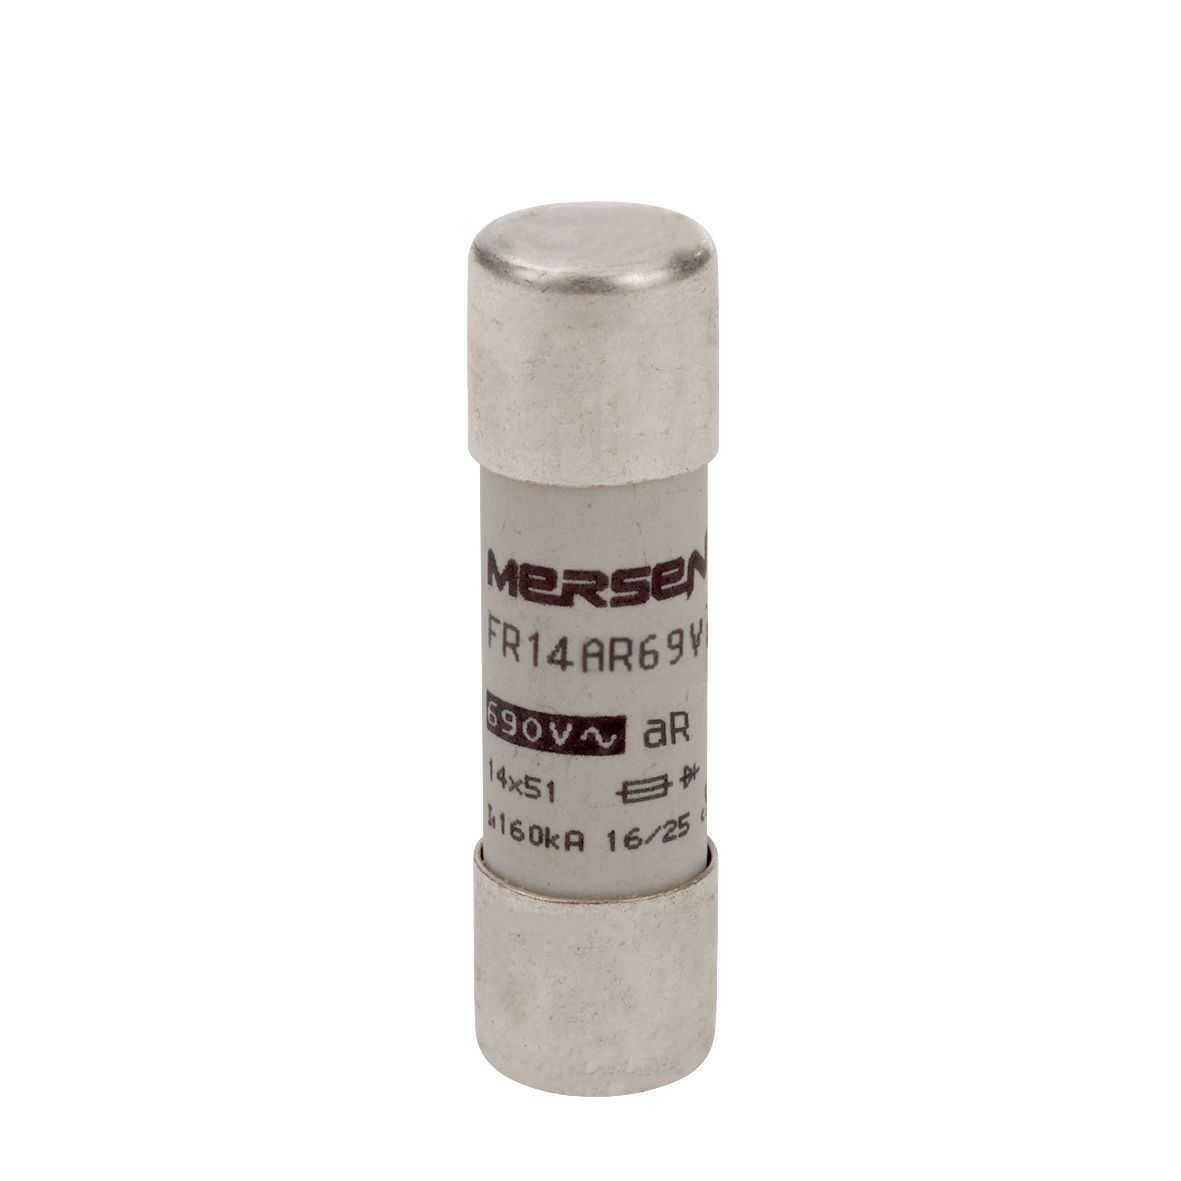 K1027327 - Cylindrical fuse-link aR 690VAC 14x51, 10A, without indicator